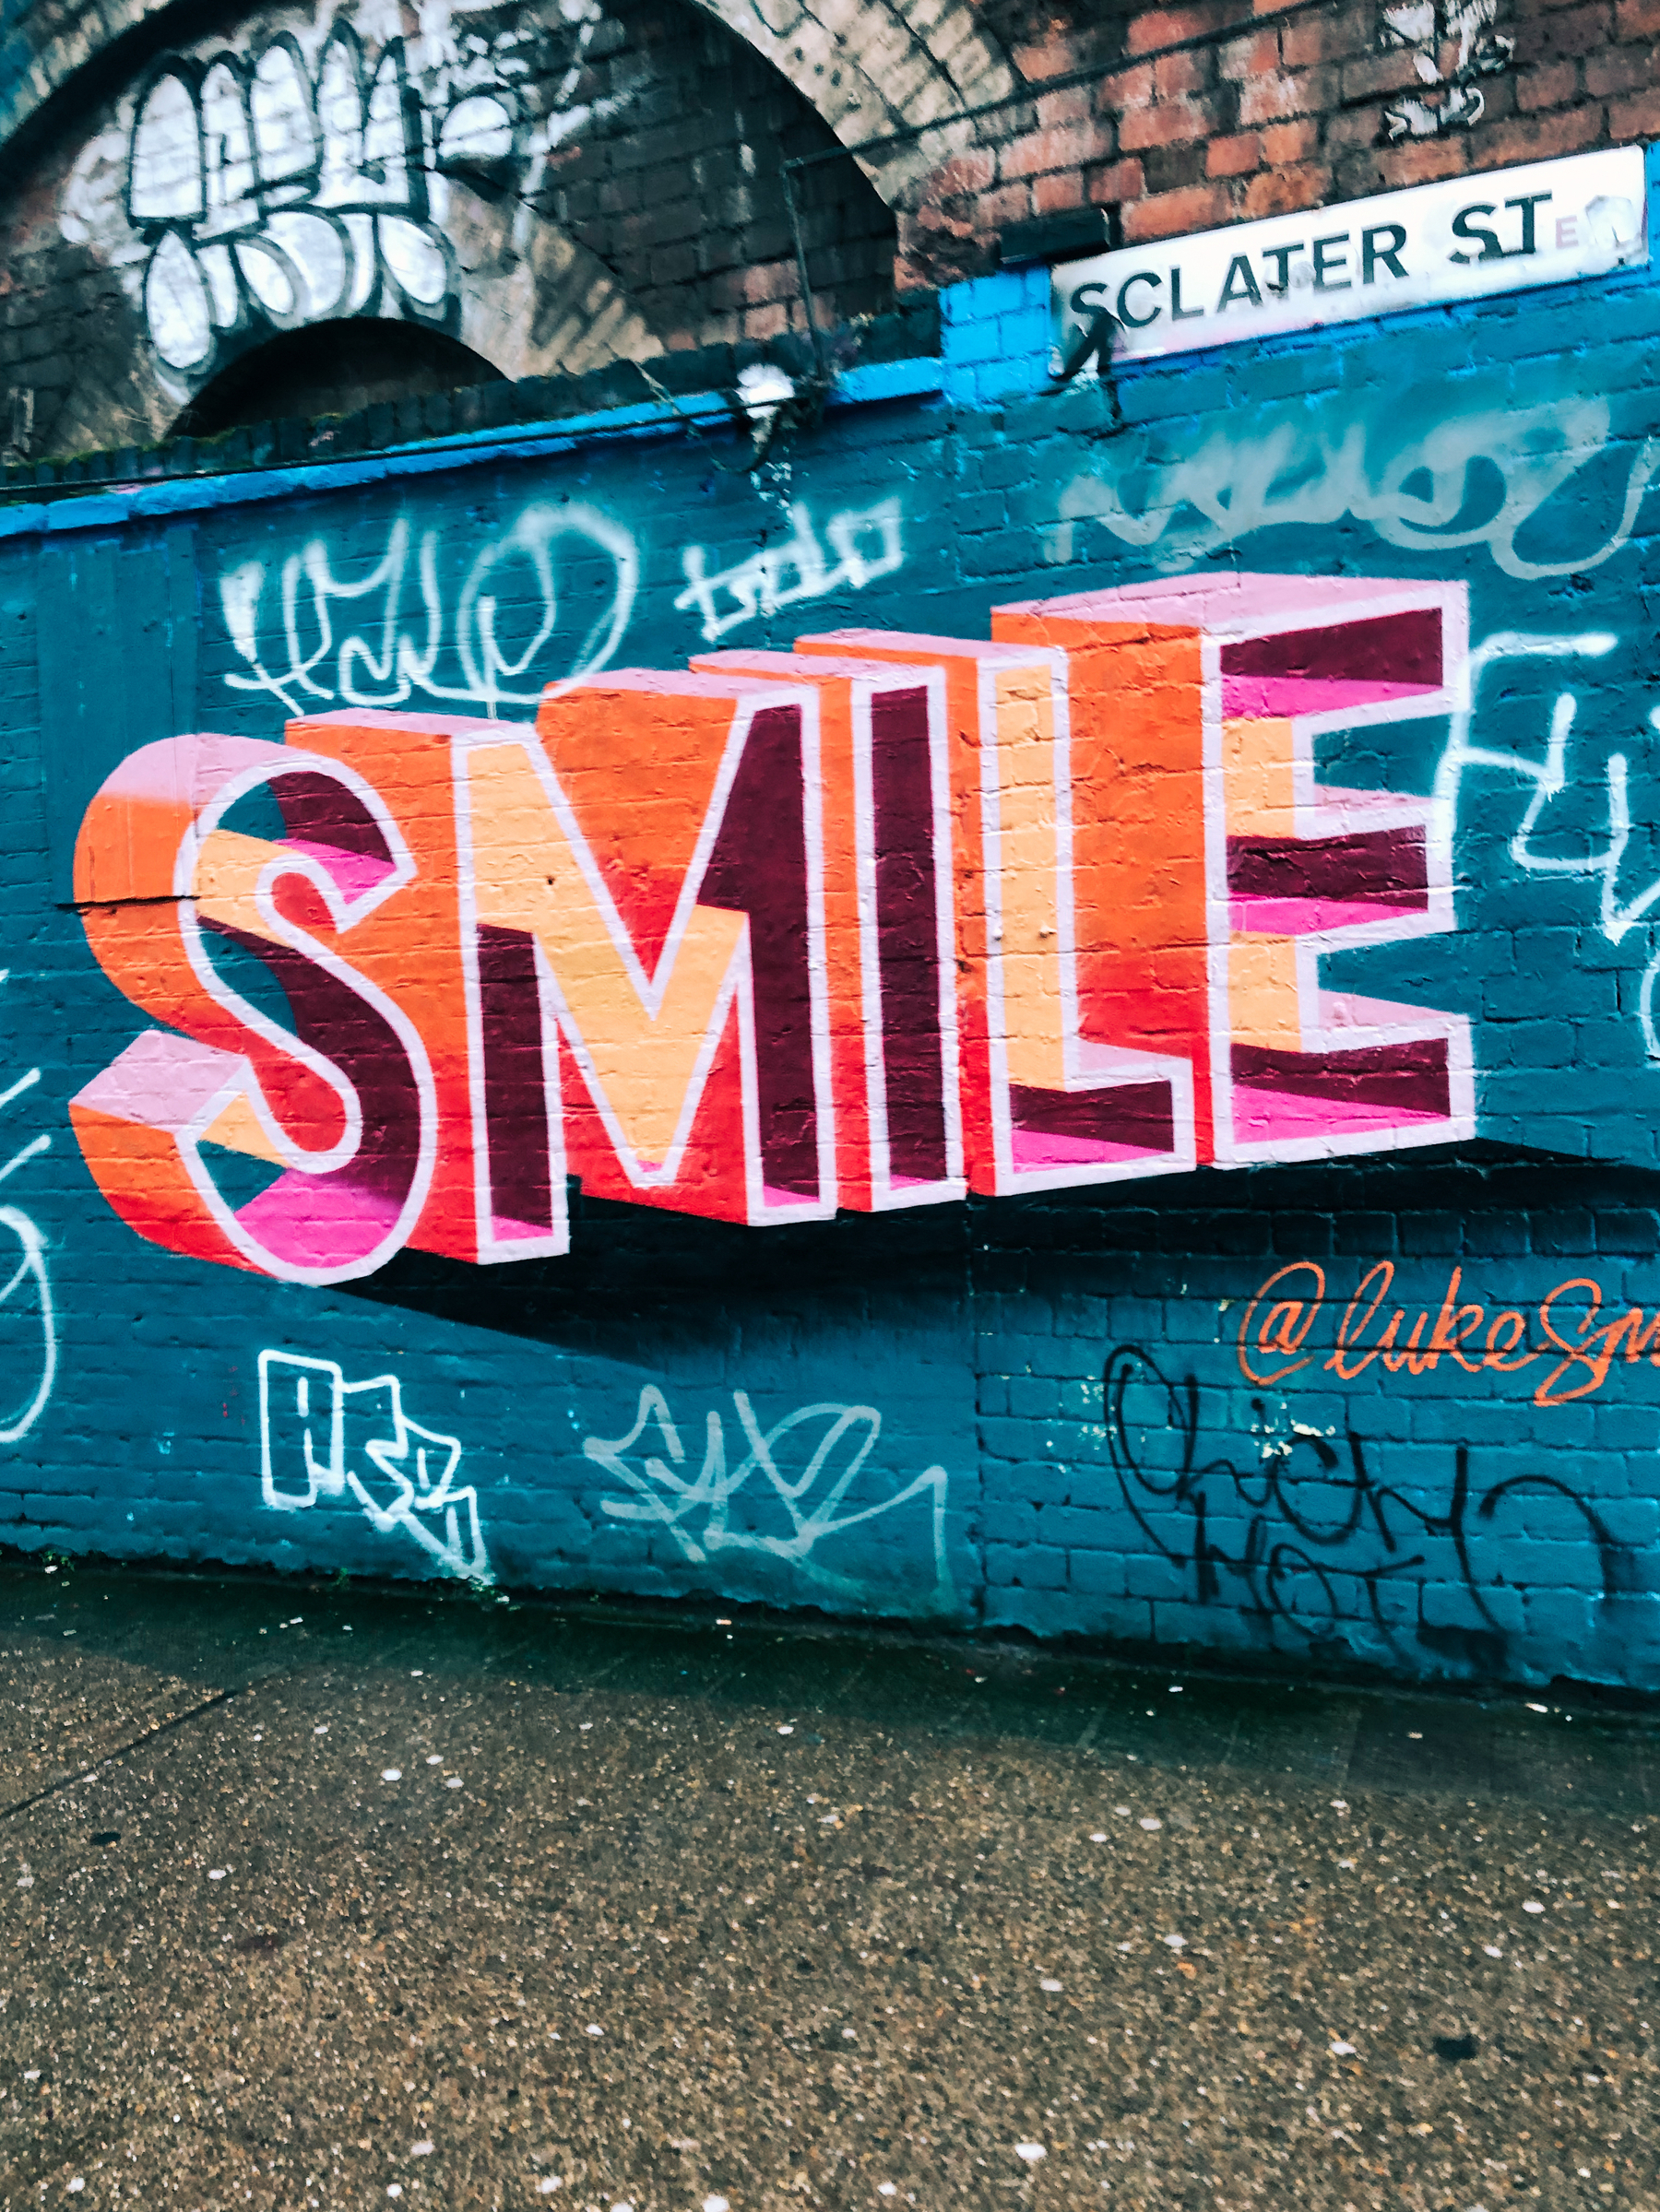 Graffitied wall. The word “Smile”.